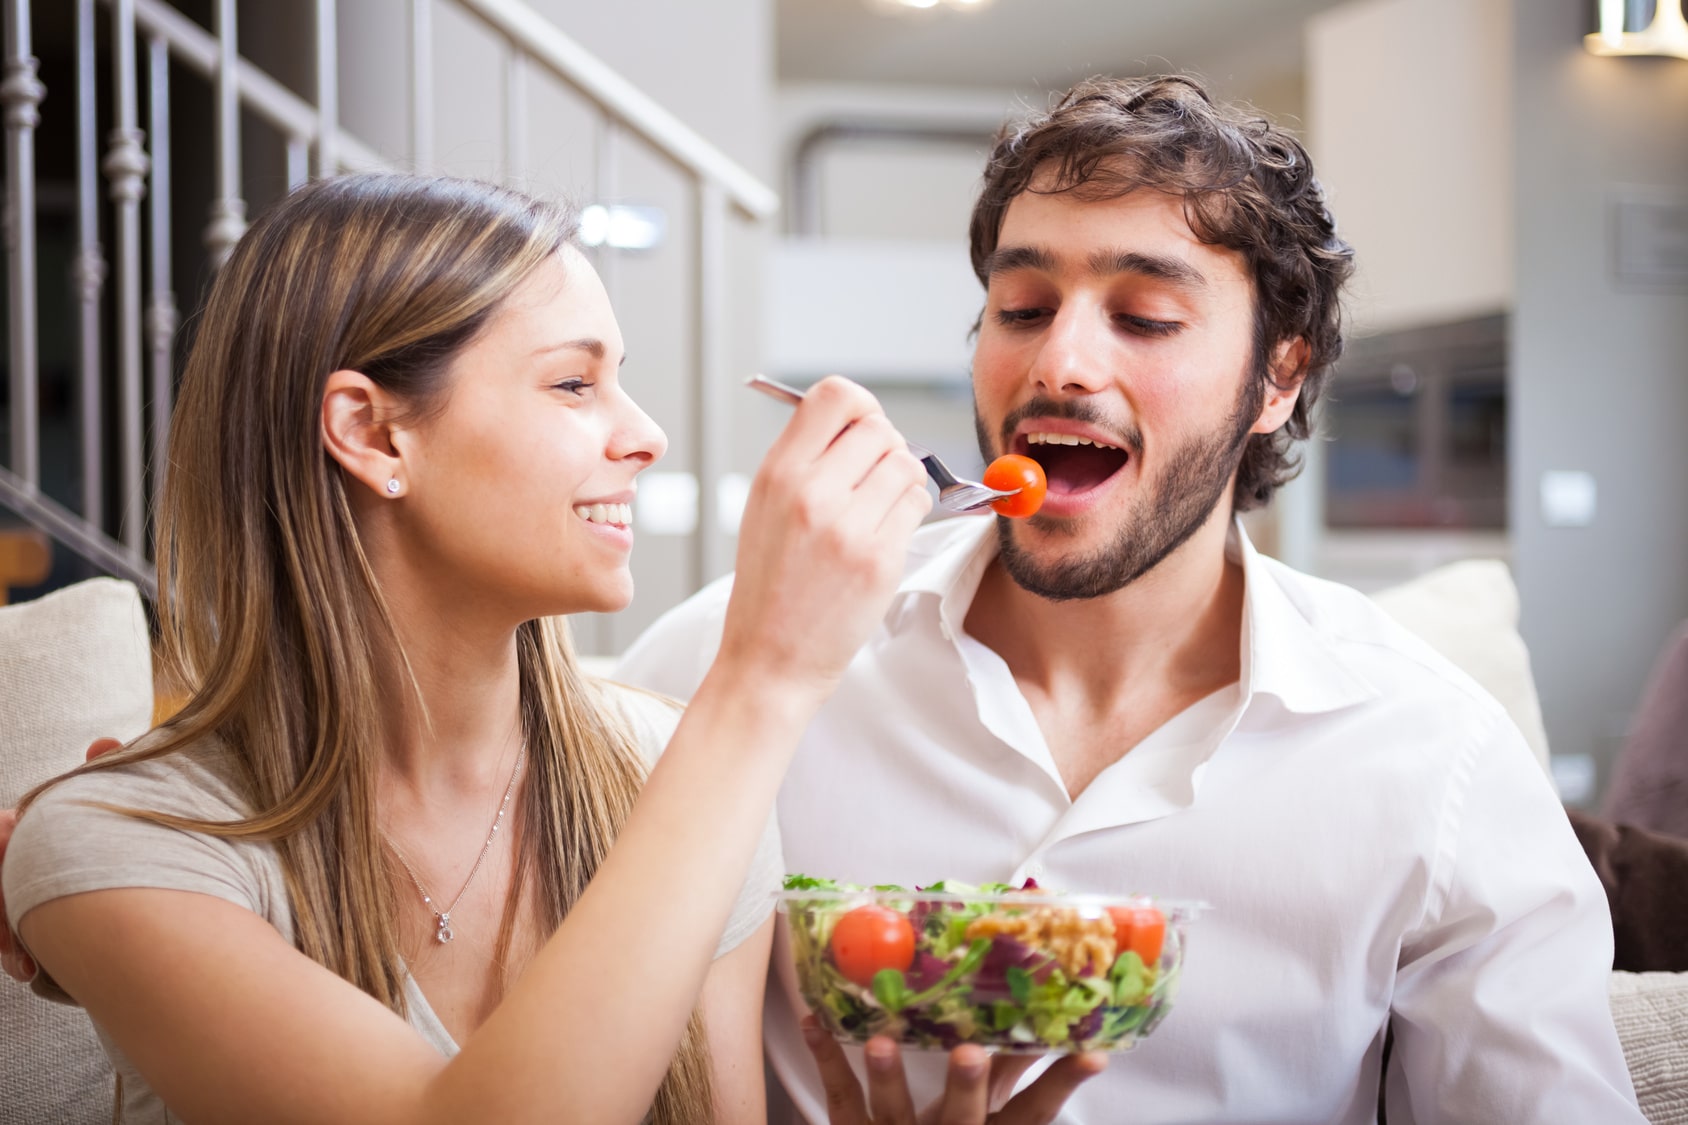 Couple eating a salad on a date